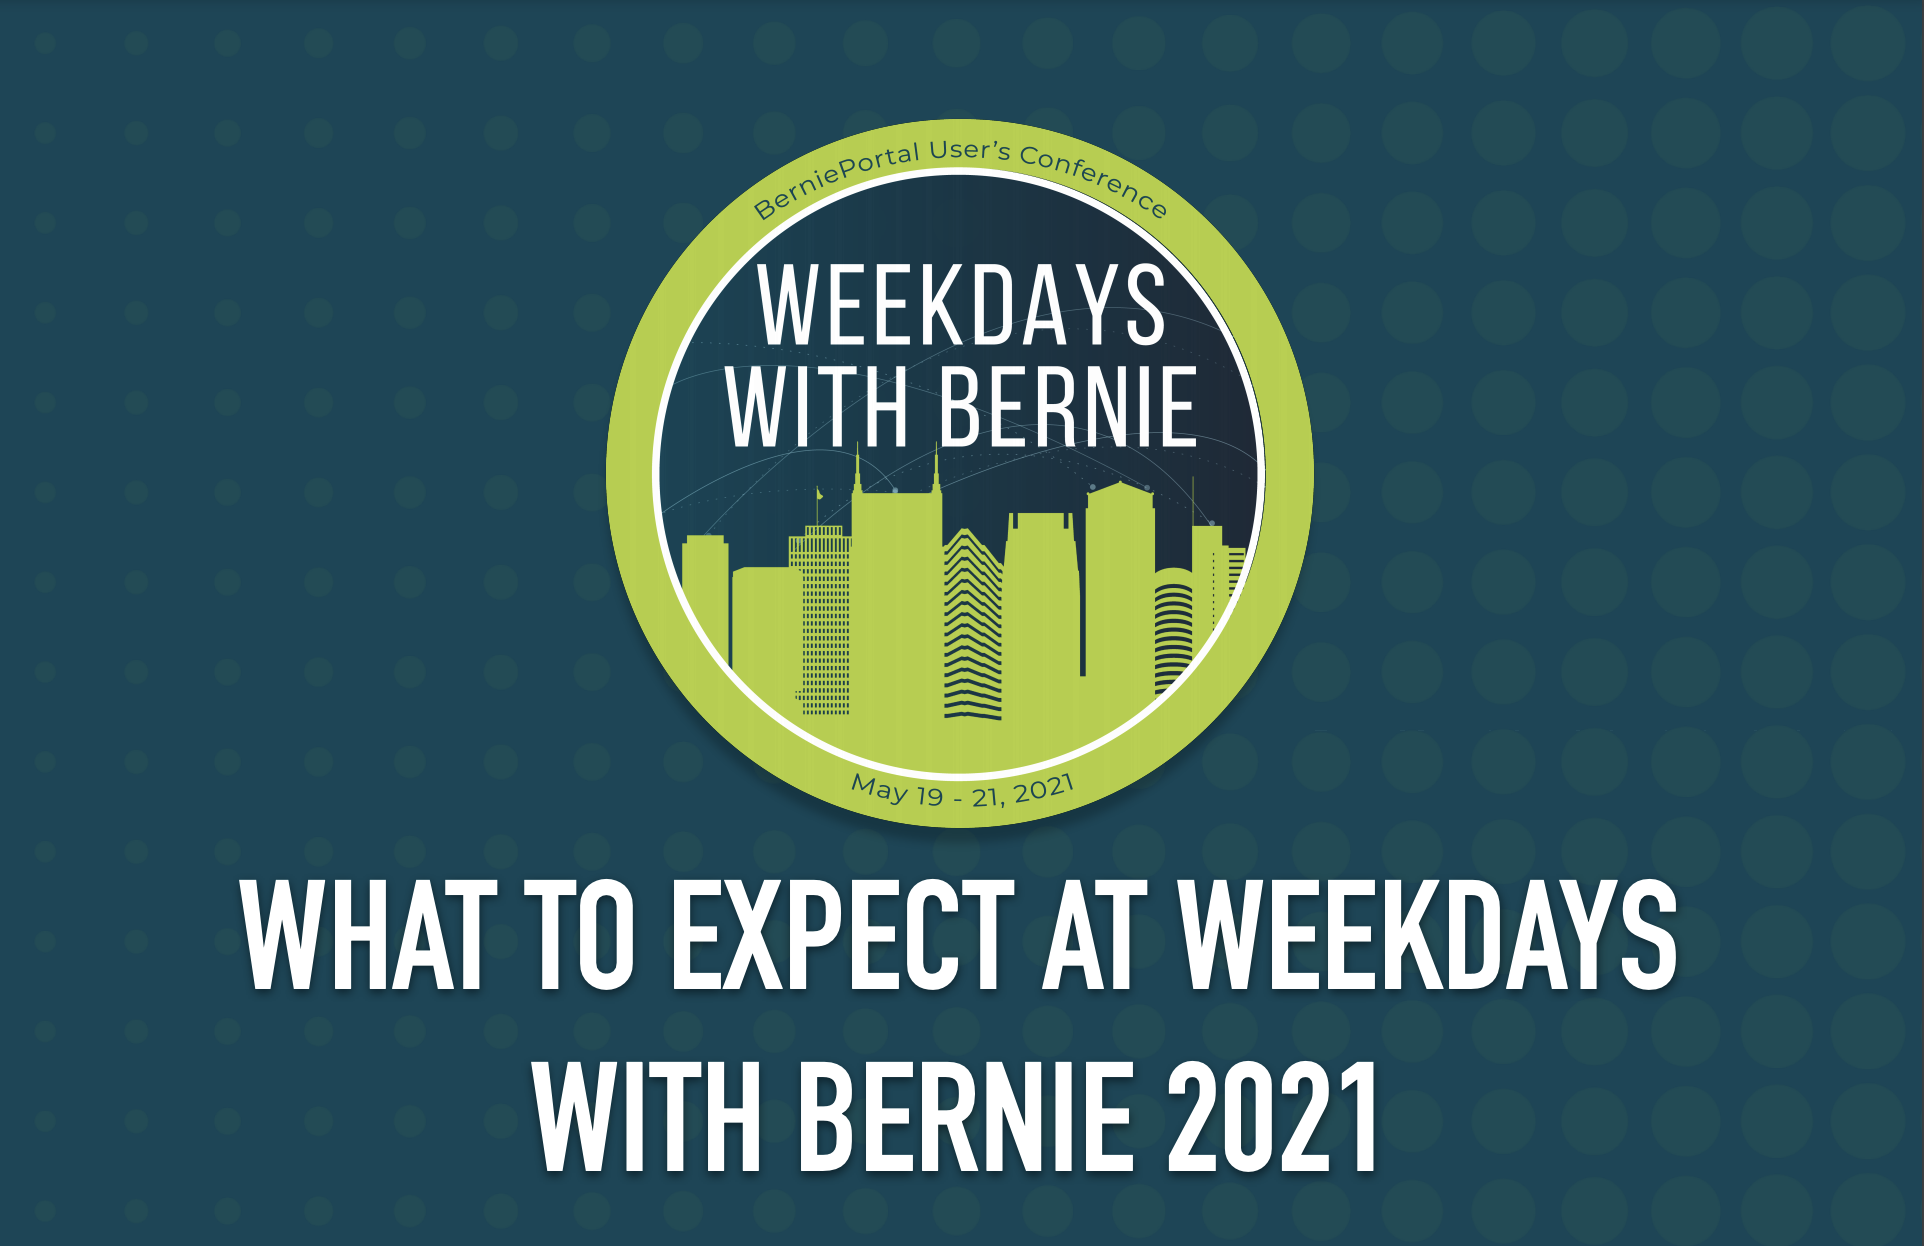 Everything Attendees Should Know About Weekdays with Bernie 2021